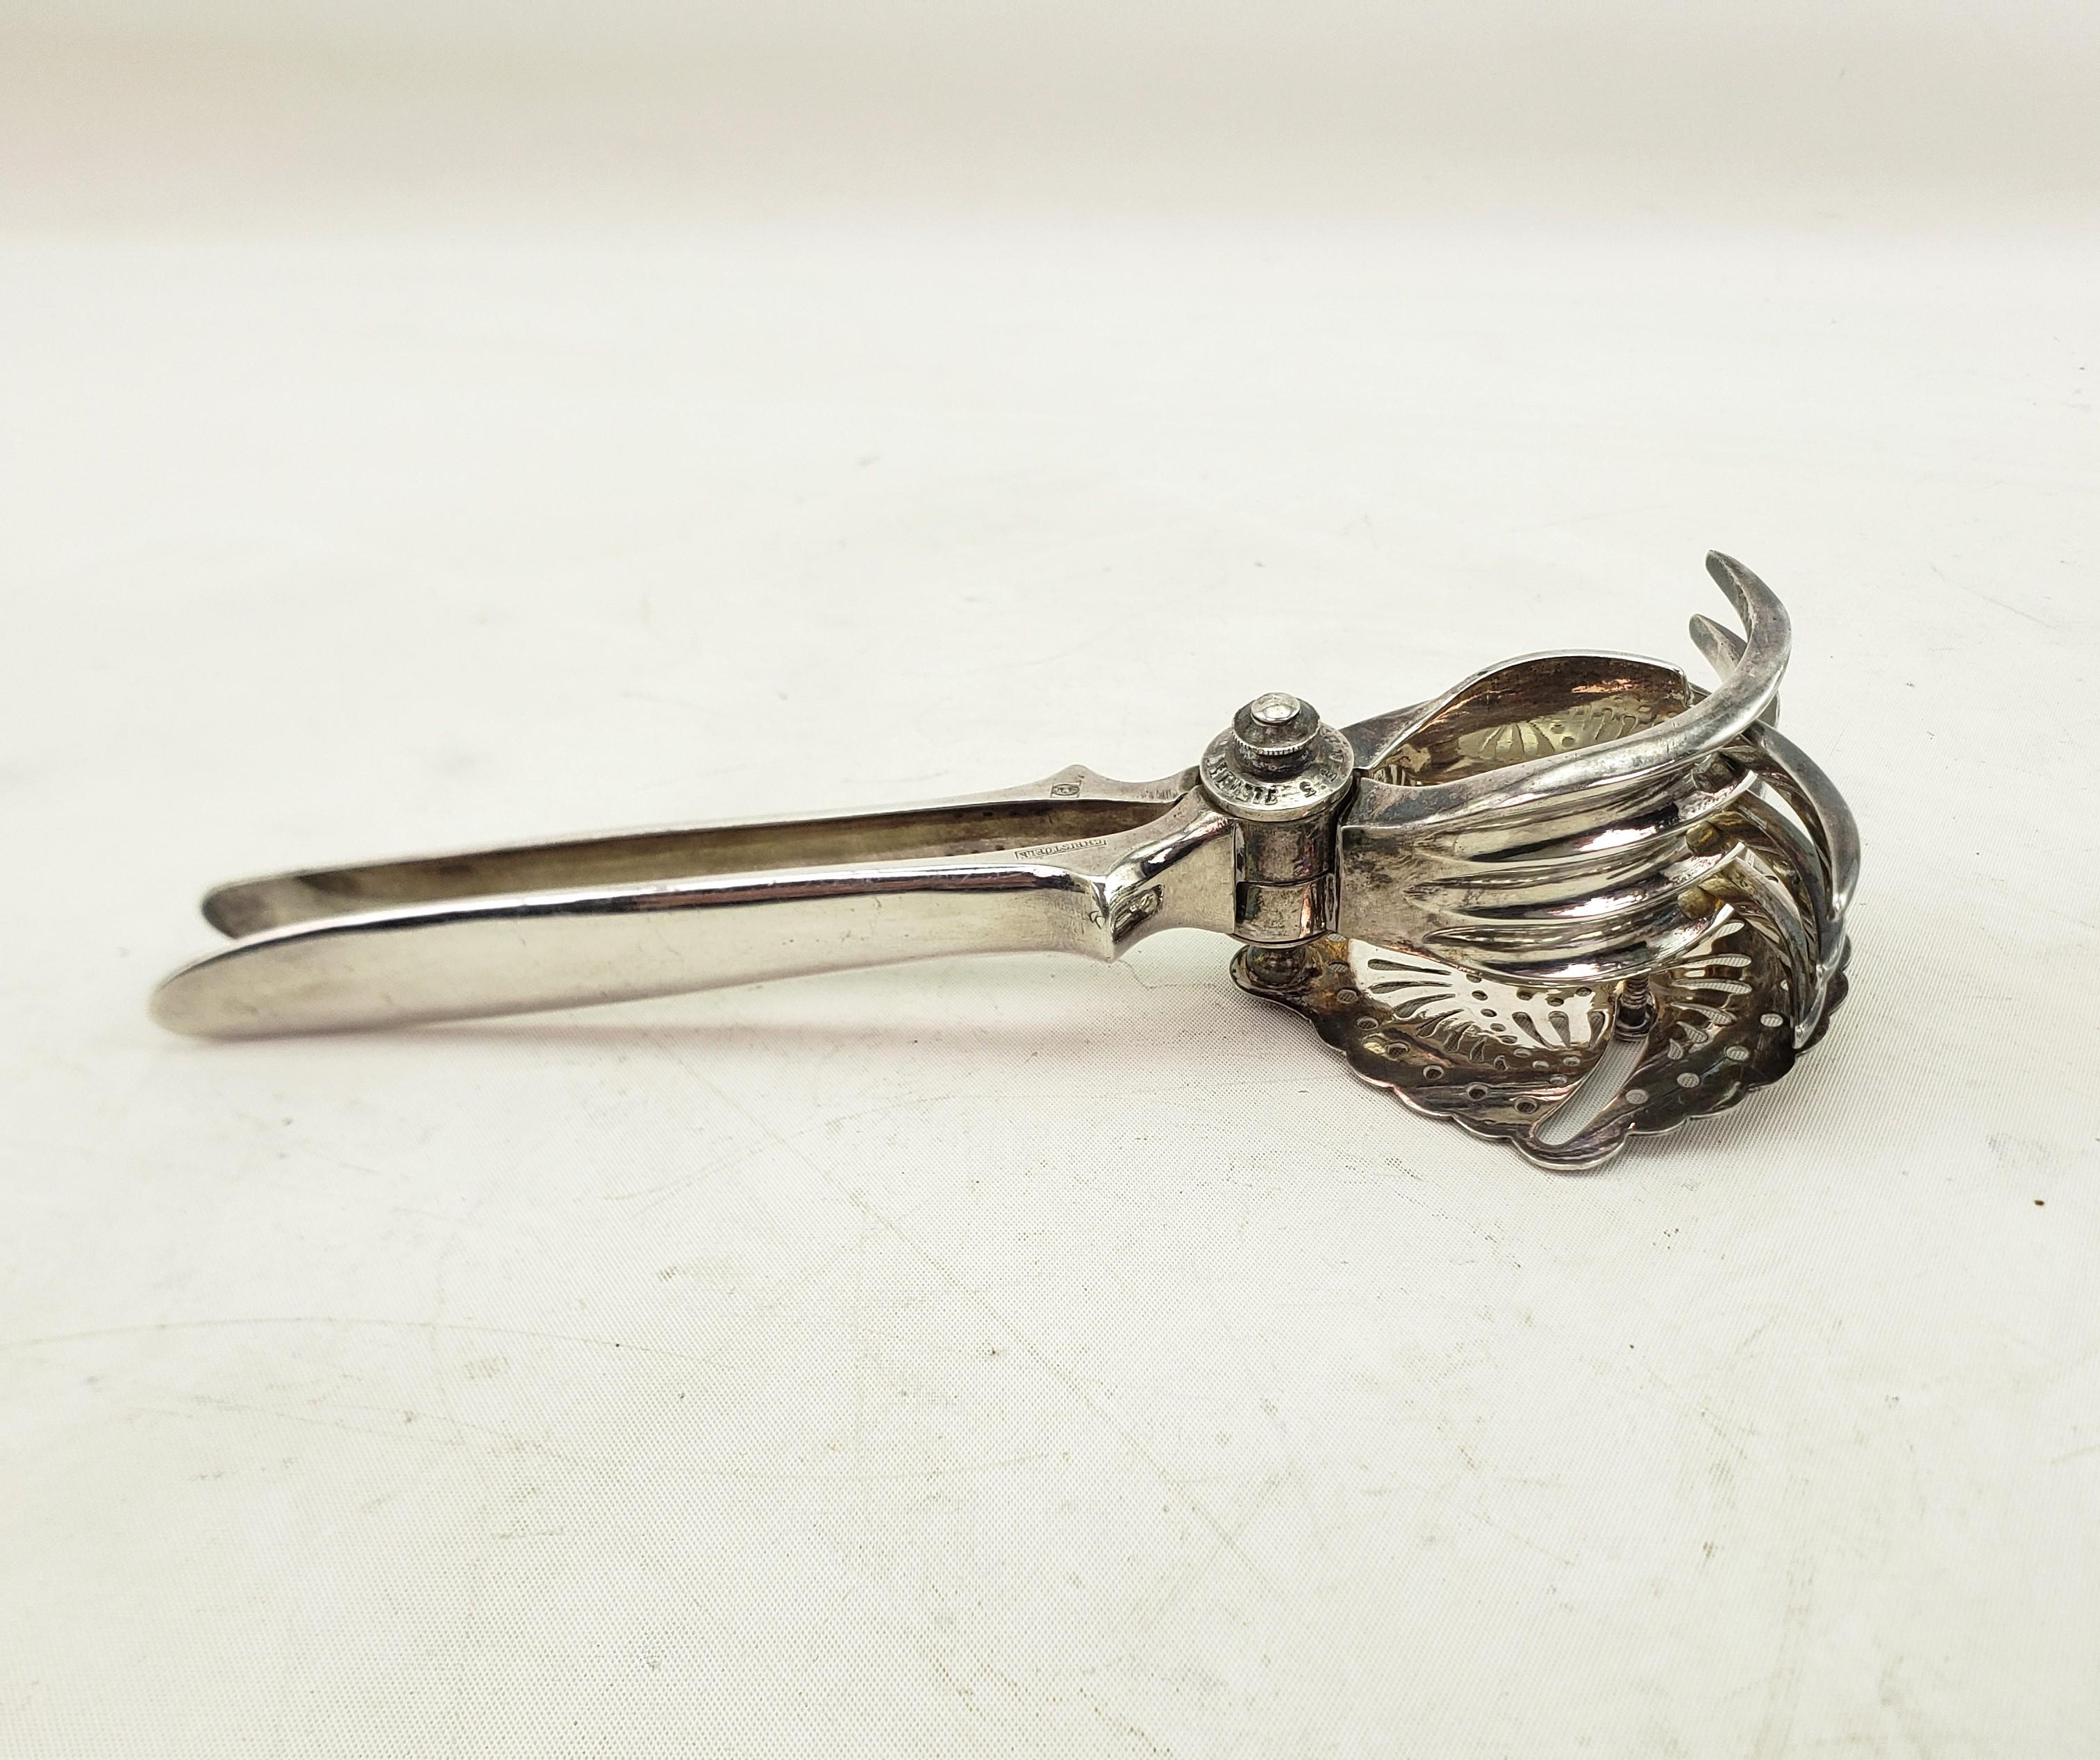 French Christofle Antique Silver Plated Citrus Hand Press or Lemon Squeezer For Sale